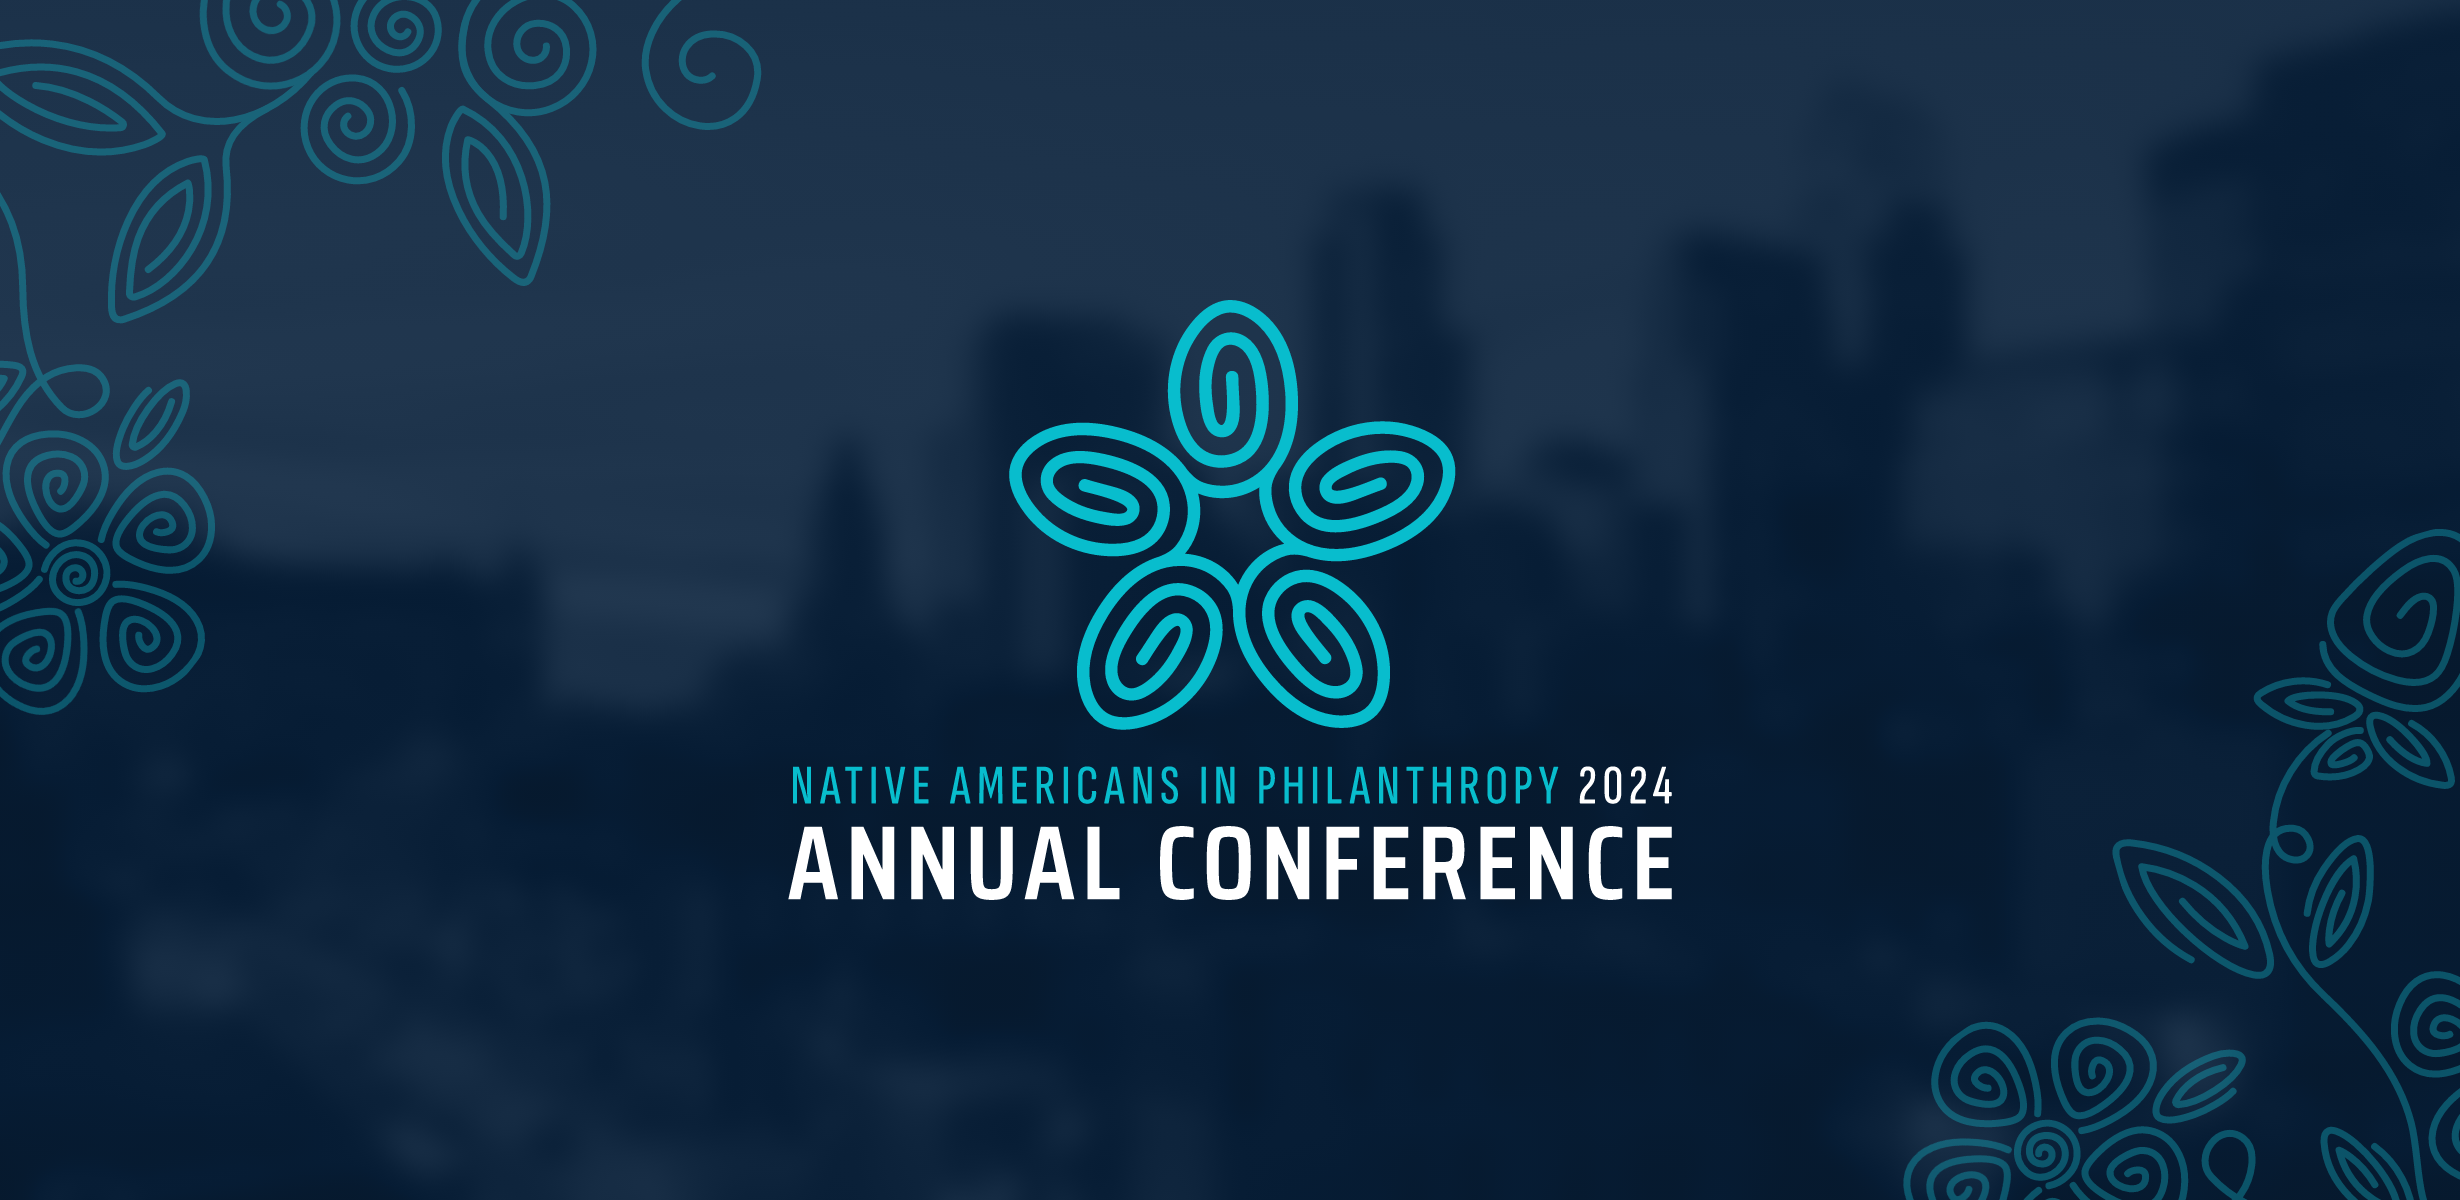 Native Americans in Philanthropy 2024 Annual Conference